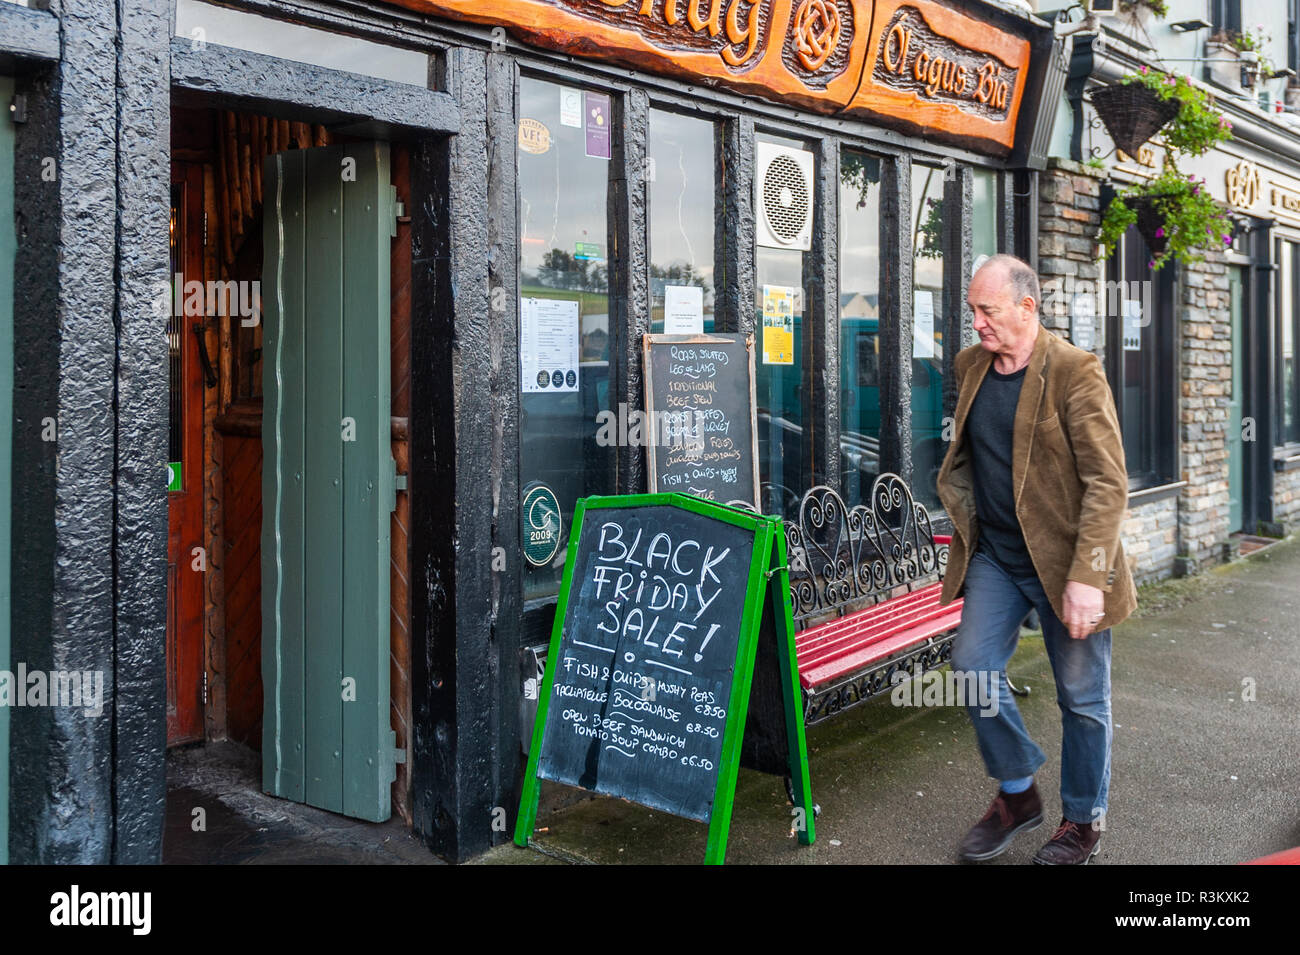 Bantry, West Cork, Ireland. 23rd Nov, 2018. A man approaches a restaurant advertising a Black Friday sale on a busy day in the West Cork town. Credit: Andy Gibson/Alamy Live News. Stock Photo